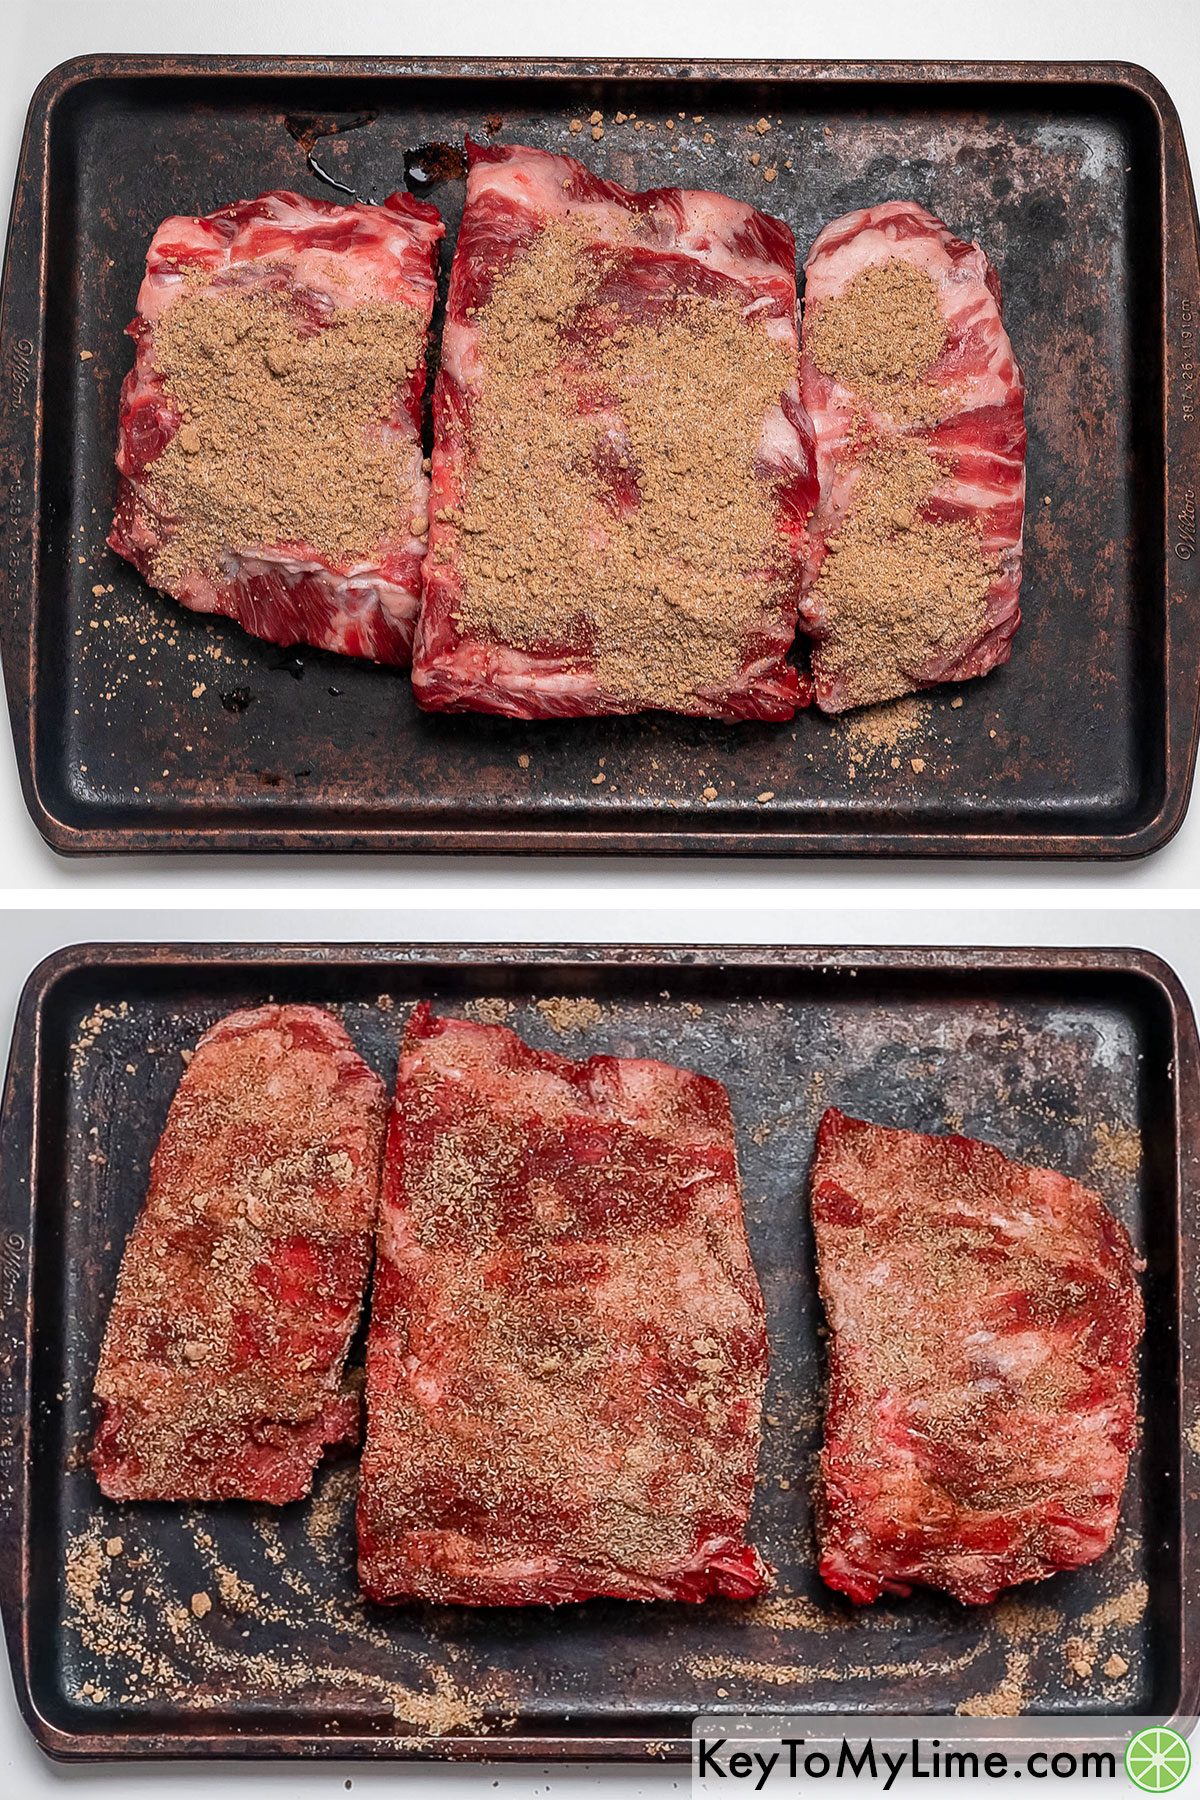 Massaging the dry rub on the ribs on a flat surface.